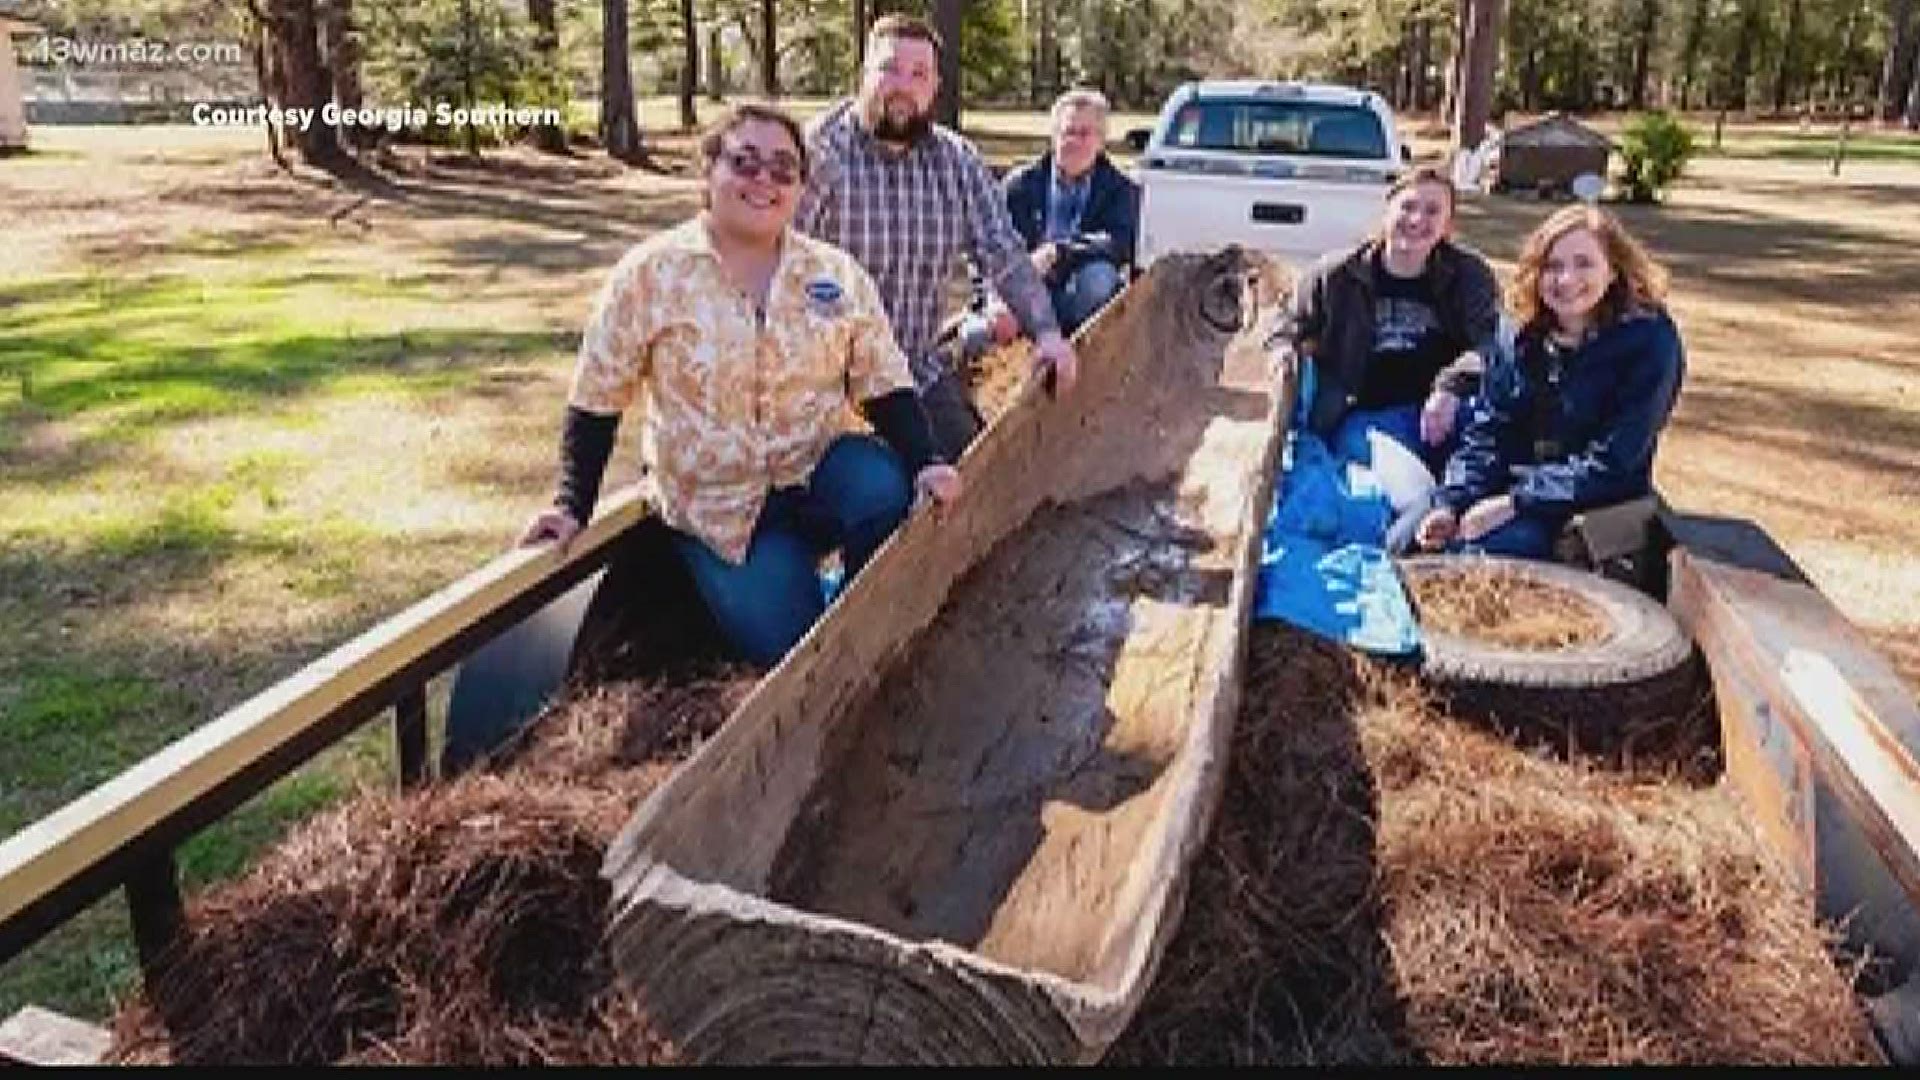 The next time you go down the Oconee River, keep your eyes open for artifacts from the past. One group of guys brought home an incredible find.